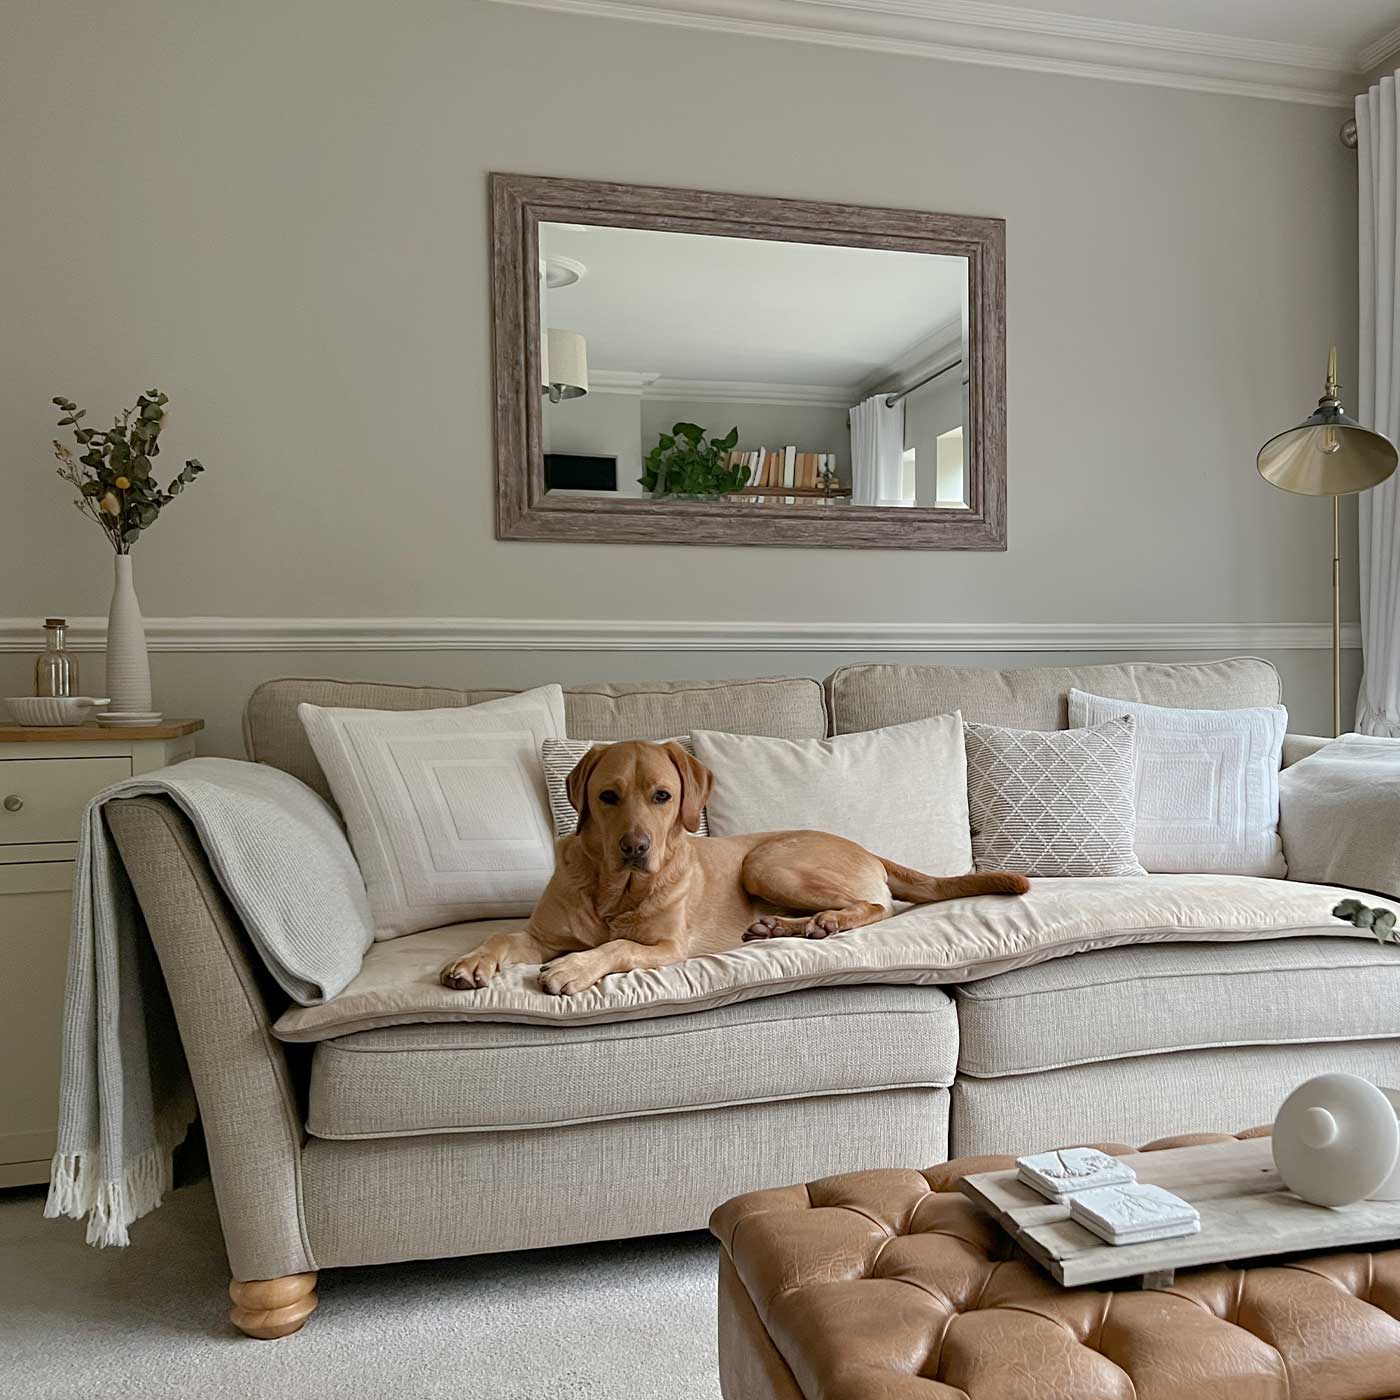 Discover Our Luxury Velvet Couch Topper, The Perfect Pet Couch Accessory In Stunning Mushroom Velvet ! Available Now at Lords & Labradors US